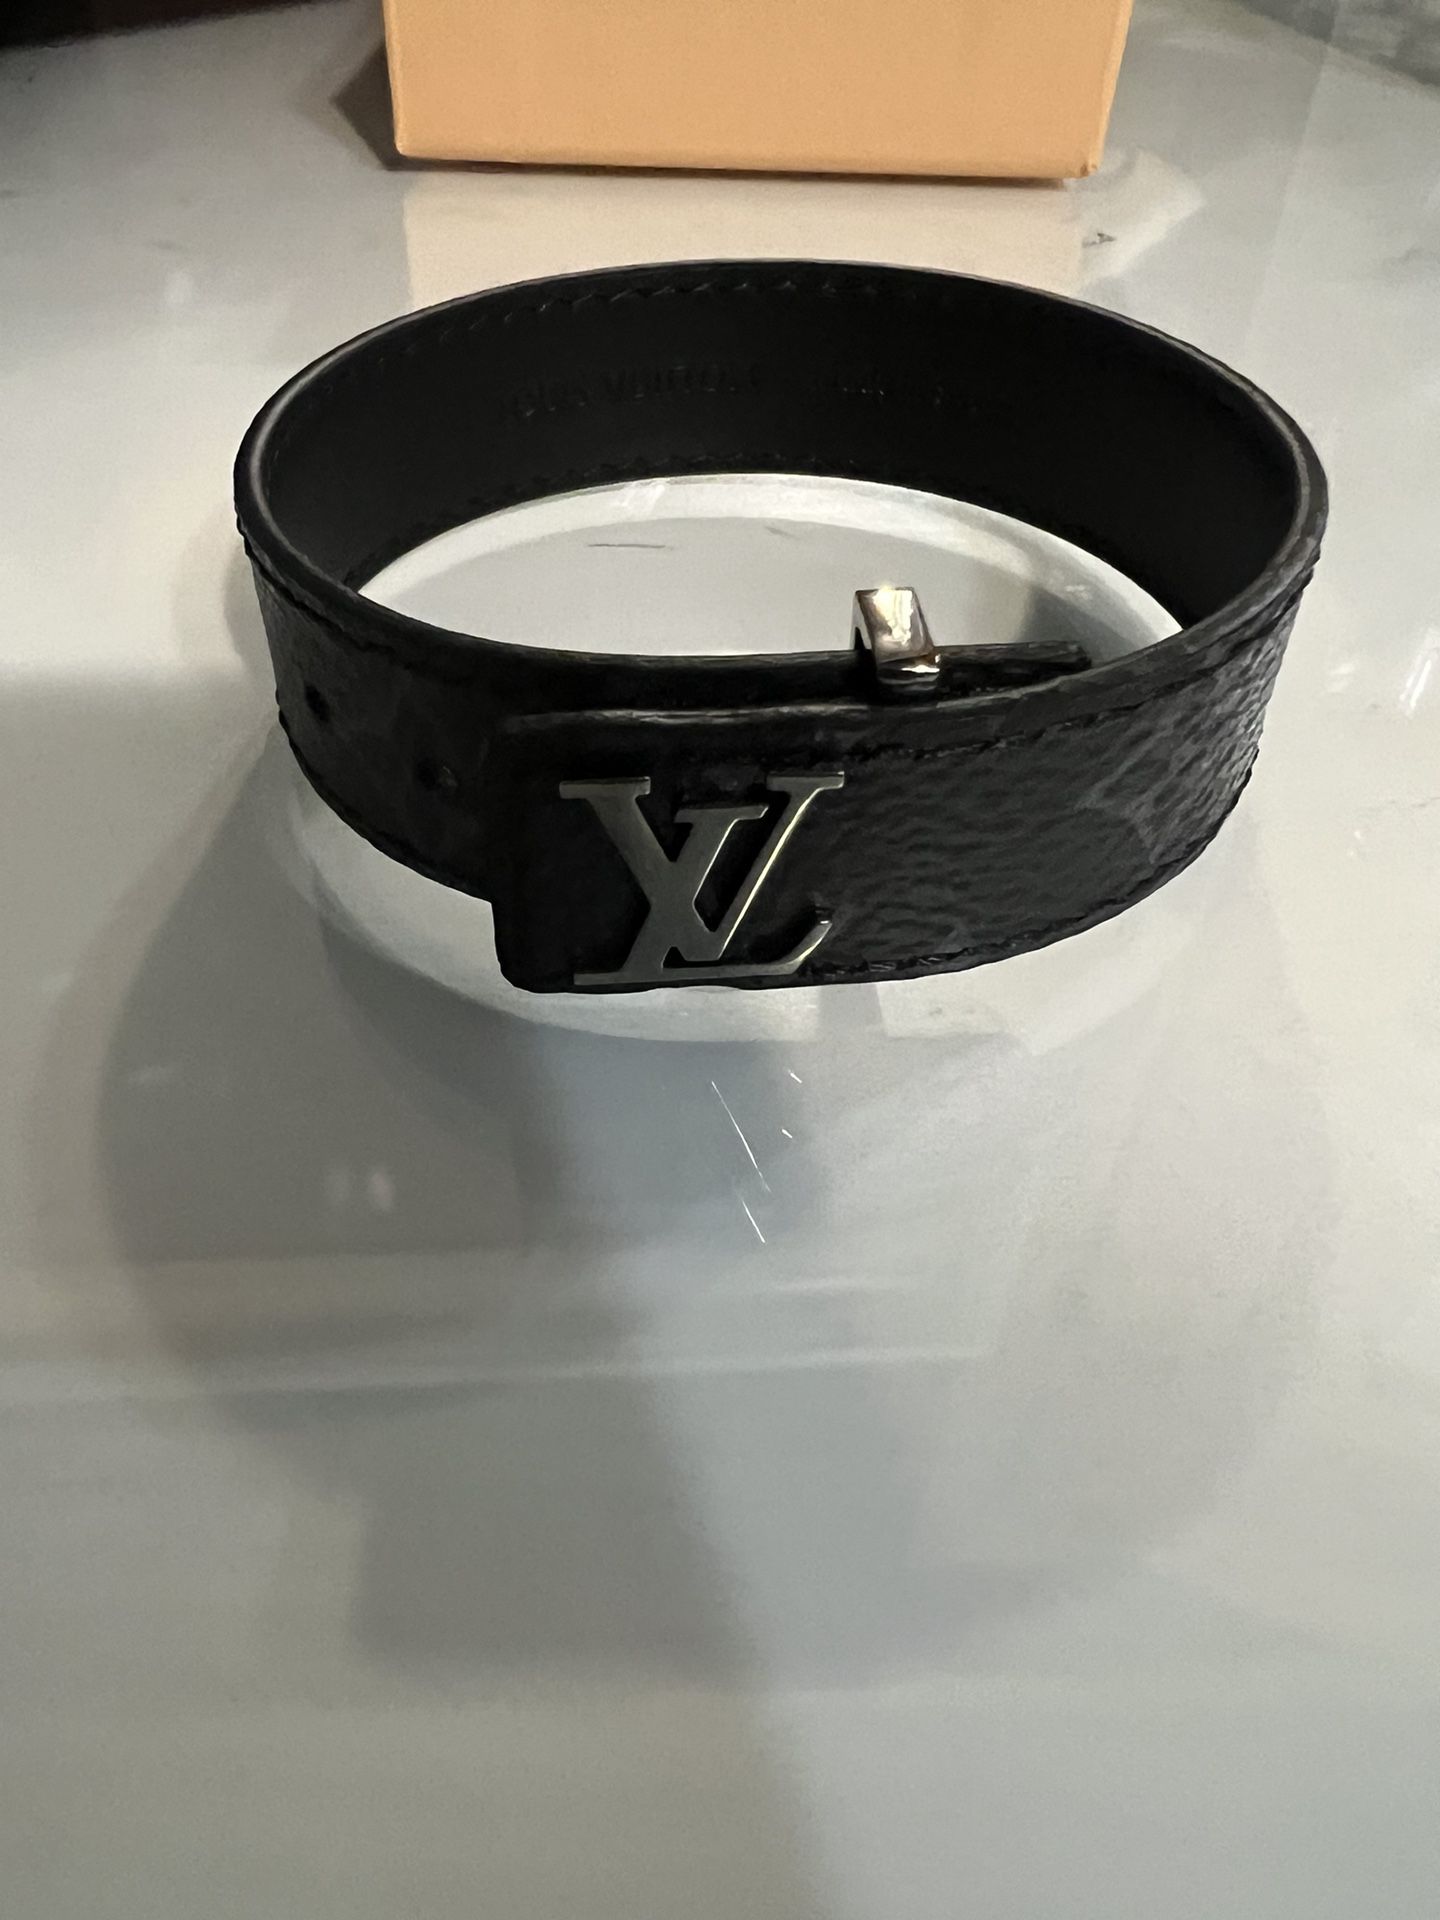 Louis Vuitton Confidential Bracelet for Sale in Bellmore, NY - OfferUp